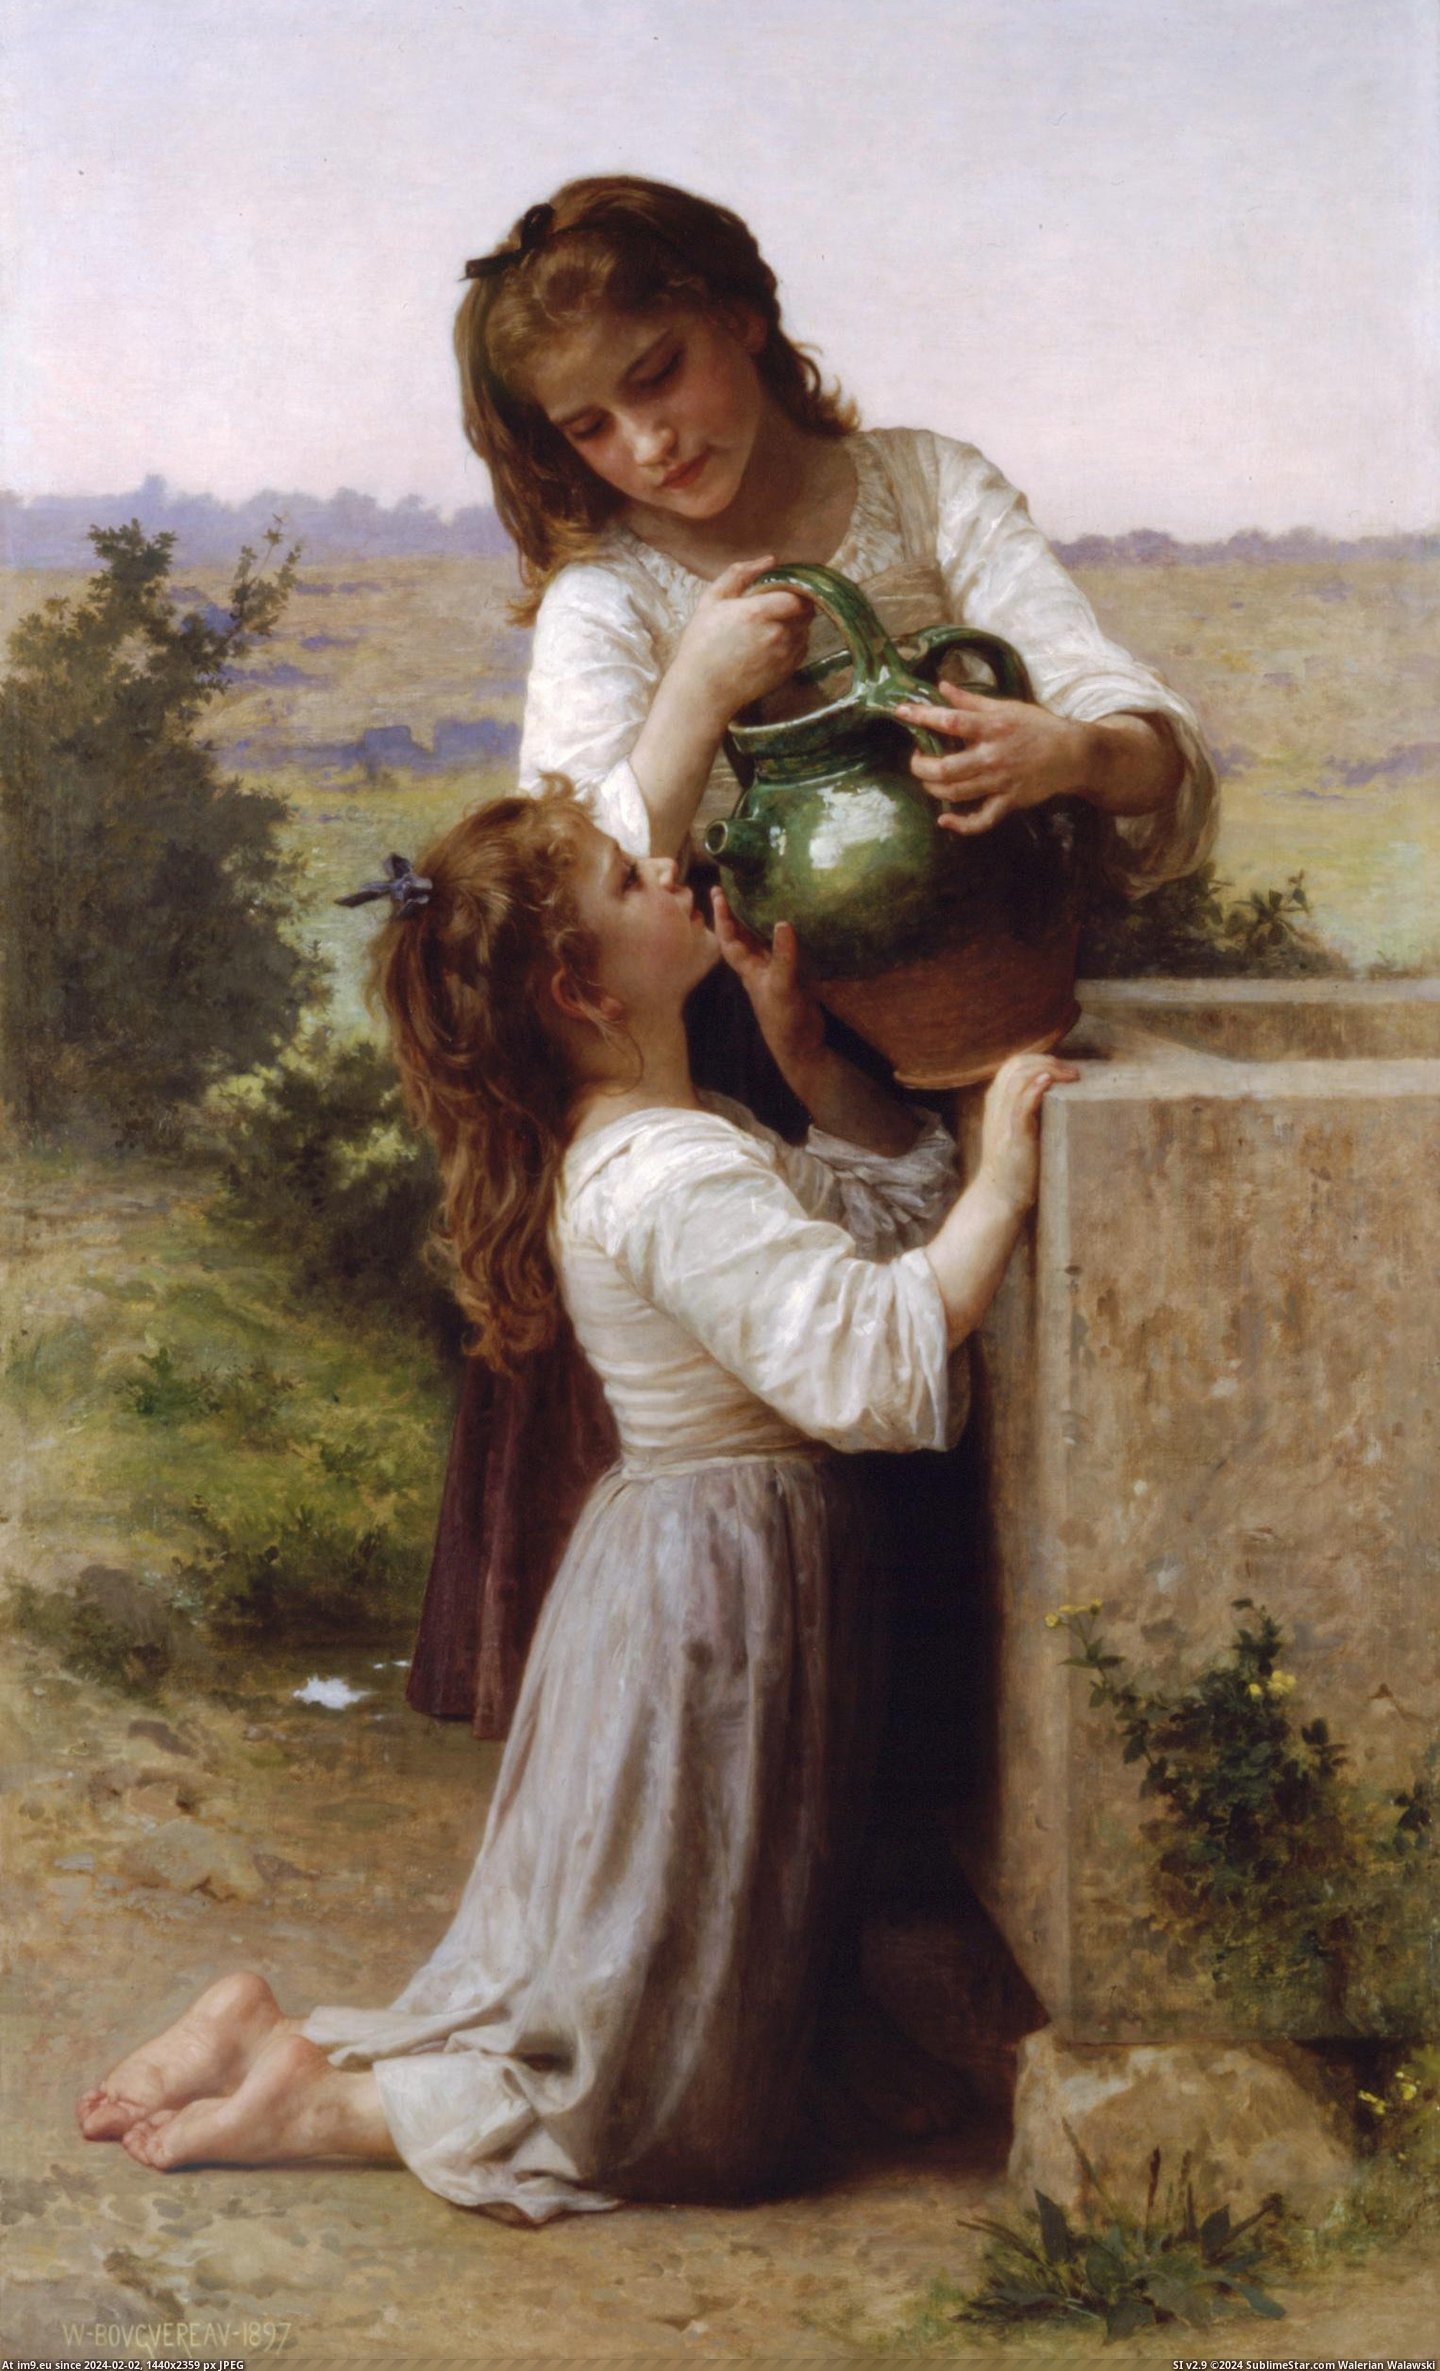 (1897) A La Fontaine - William Adolphe Bouguereau (in William Adolphe Bouguereau paintings (1825-1905))